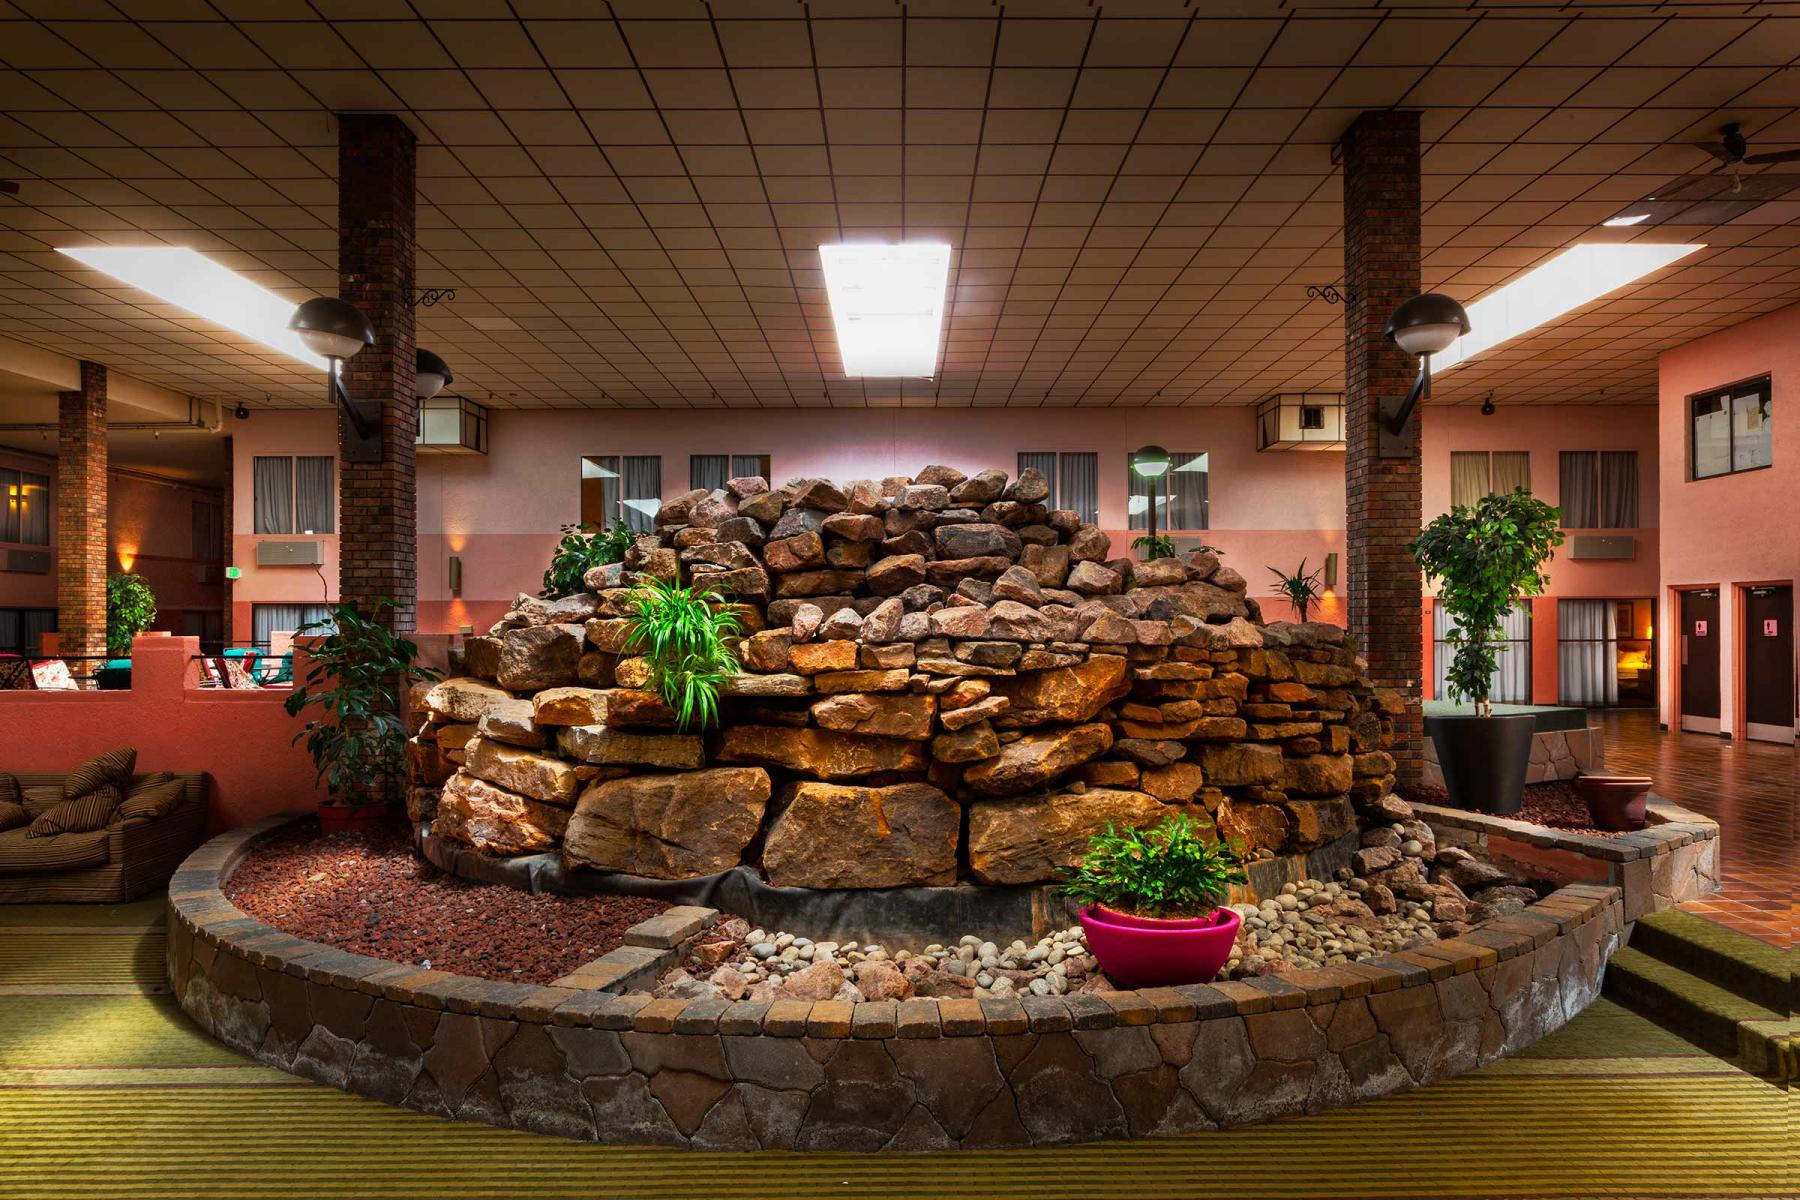 Rodeway Inn - Alamosa, Colorado - best rock garden lobby. : Visiting Mom : New York City based photographer and video specializing in portrait corporate portraits, video, editorial stories for on location and architectural photography